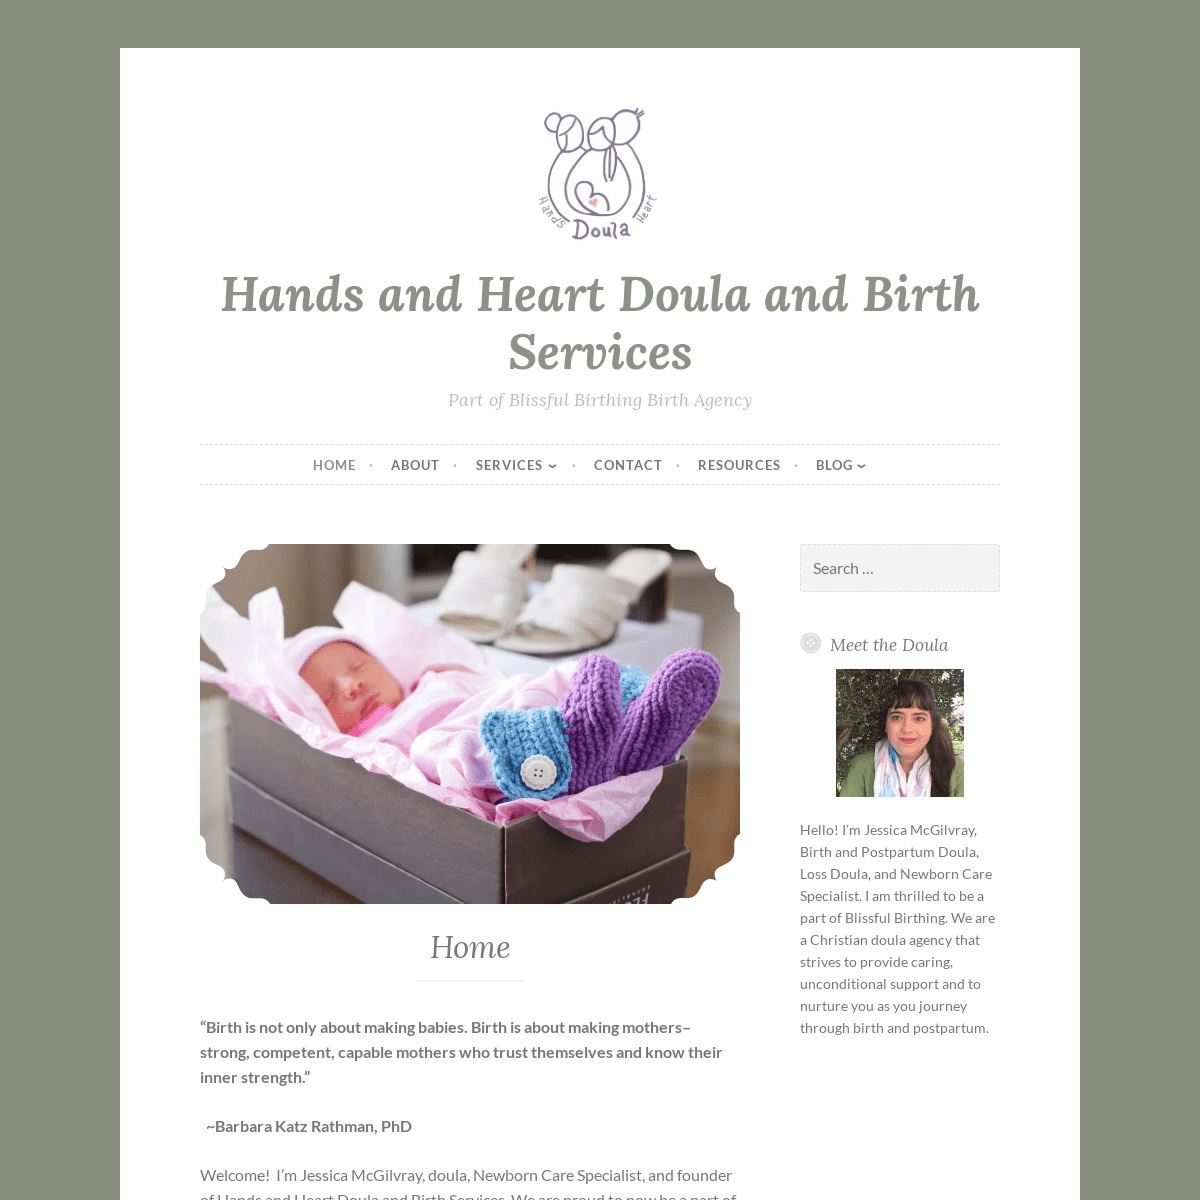 Hands and Heart Doula and Birth Services – Part of Blissful Birthing Birth Agency